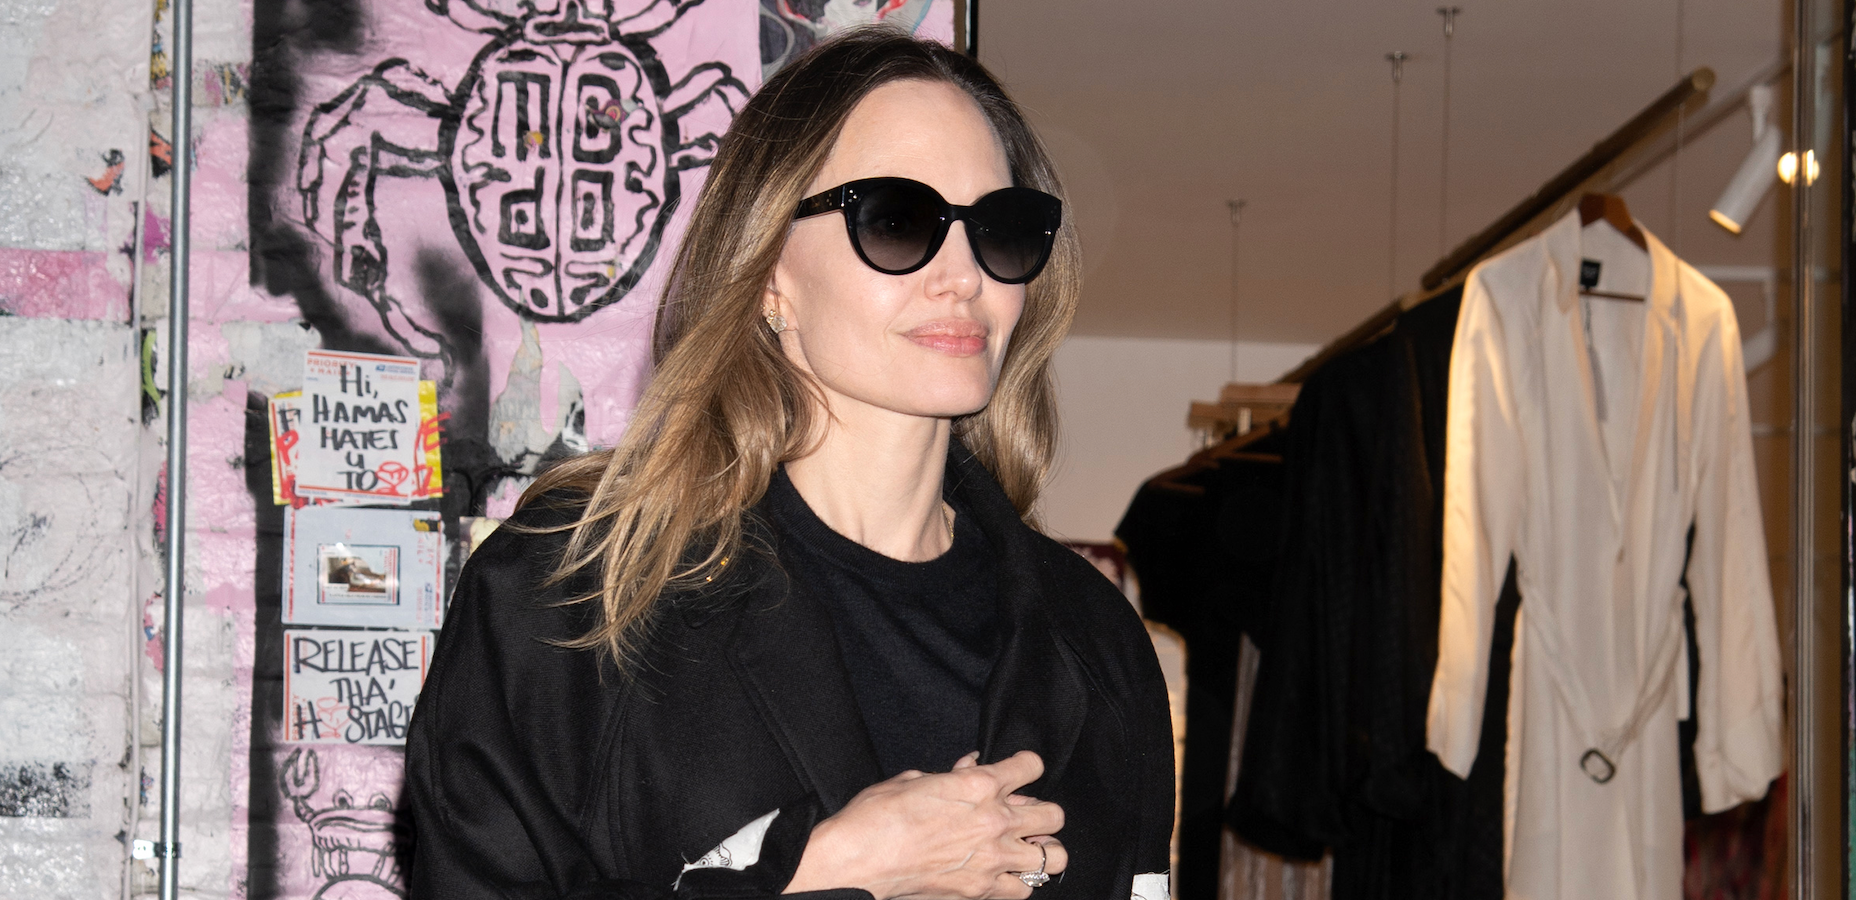 Angelina Jolie Reportedly Infuriated That Shiloh Requested To Live With With Dad